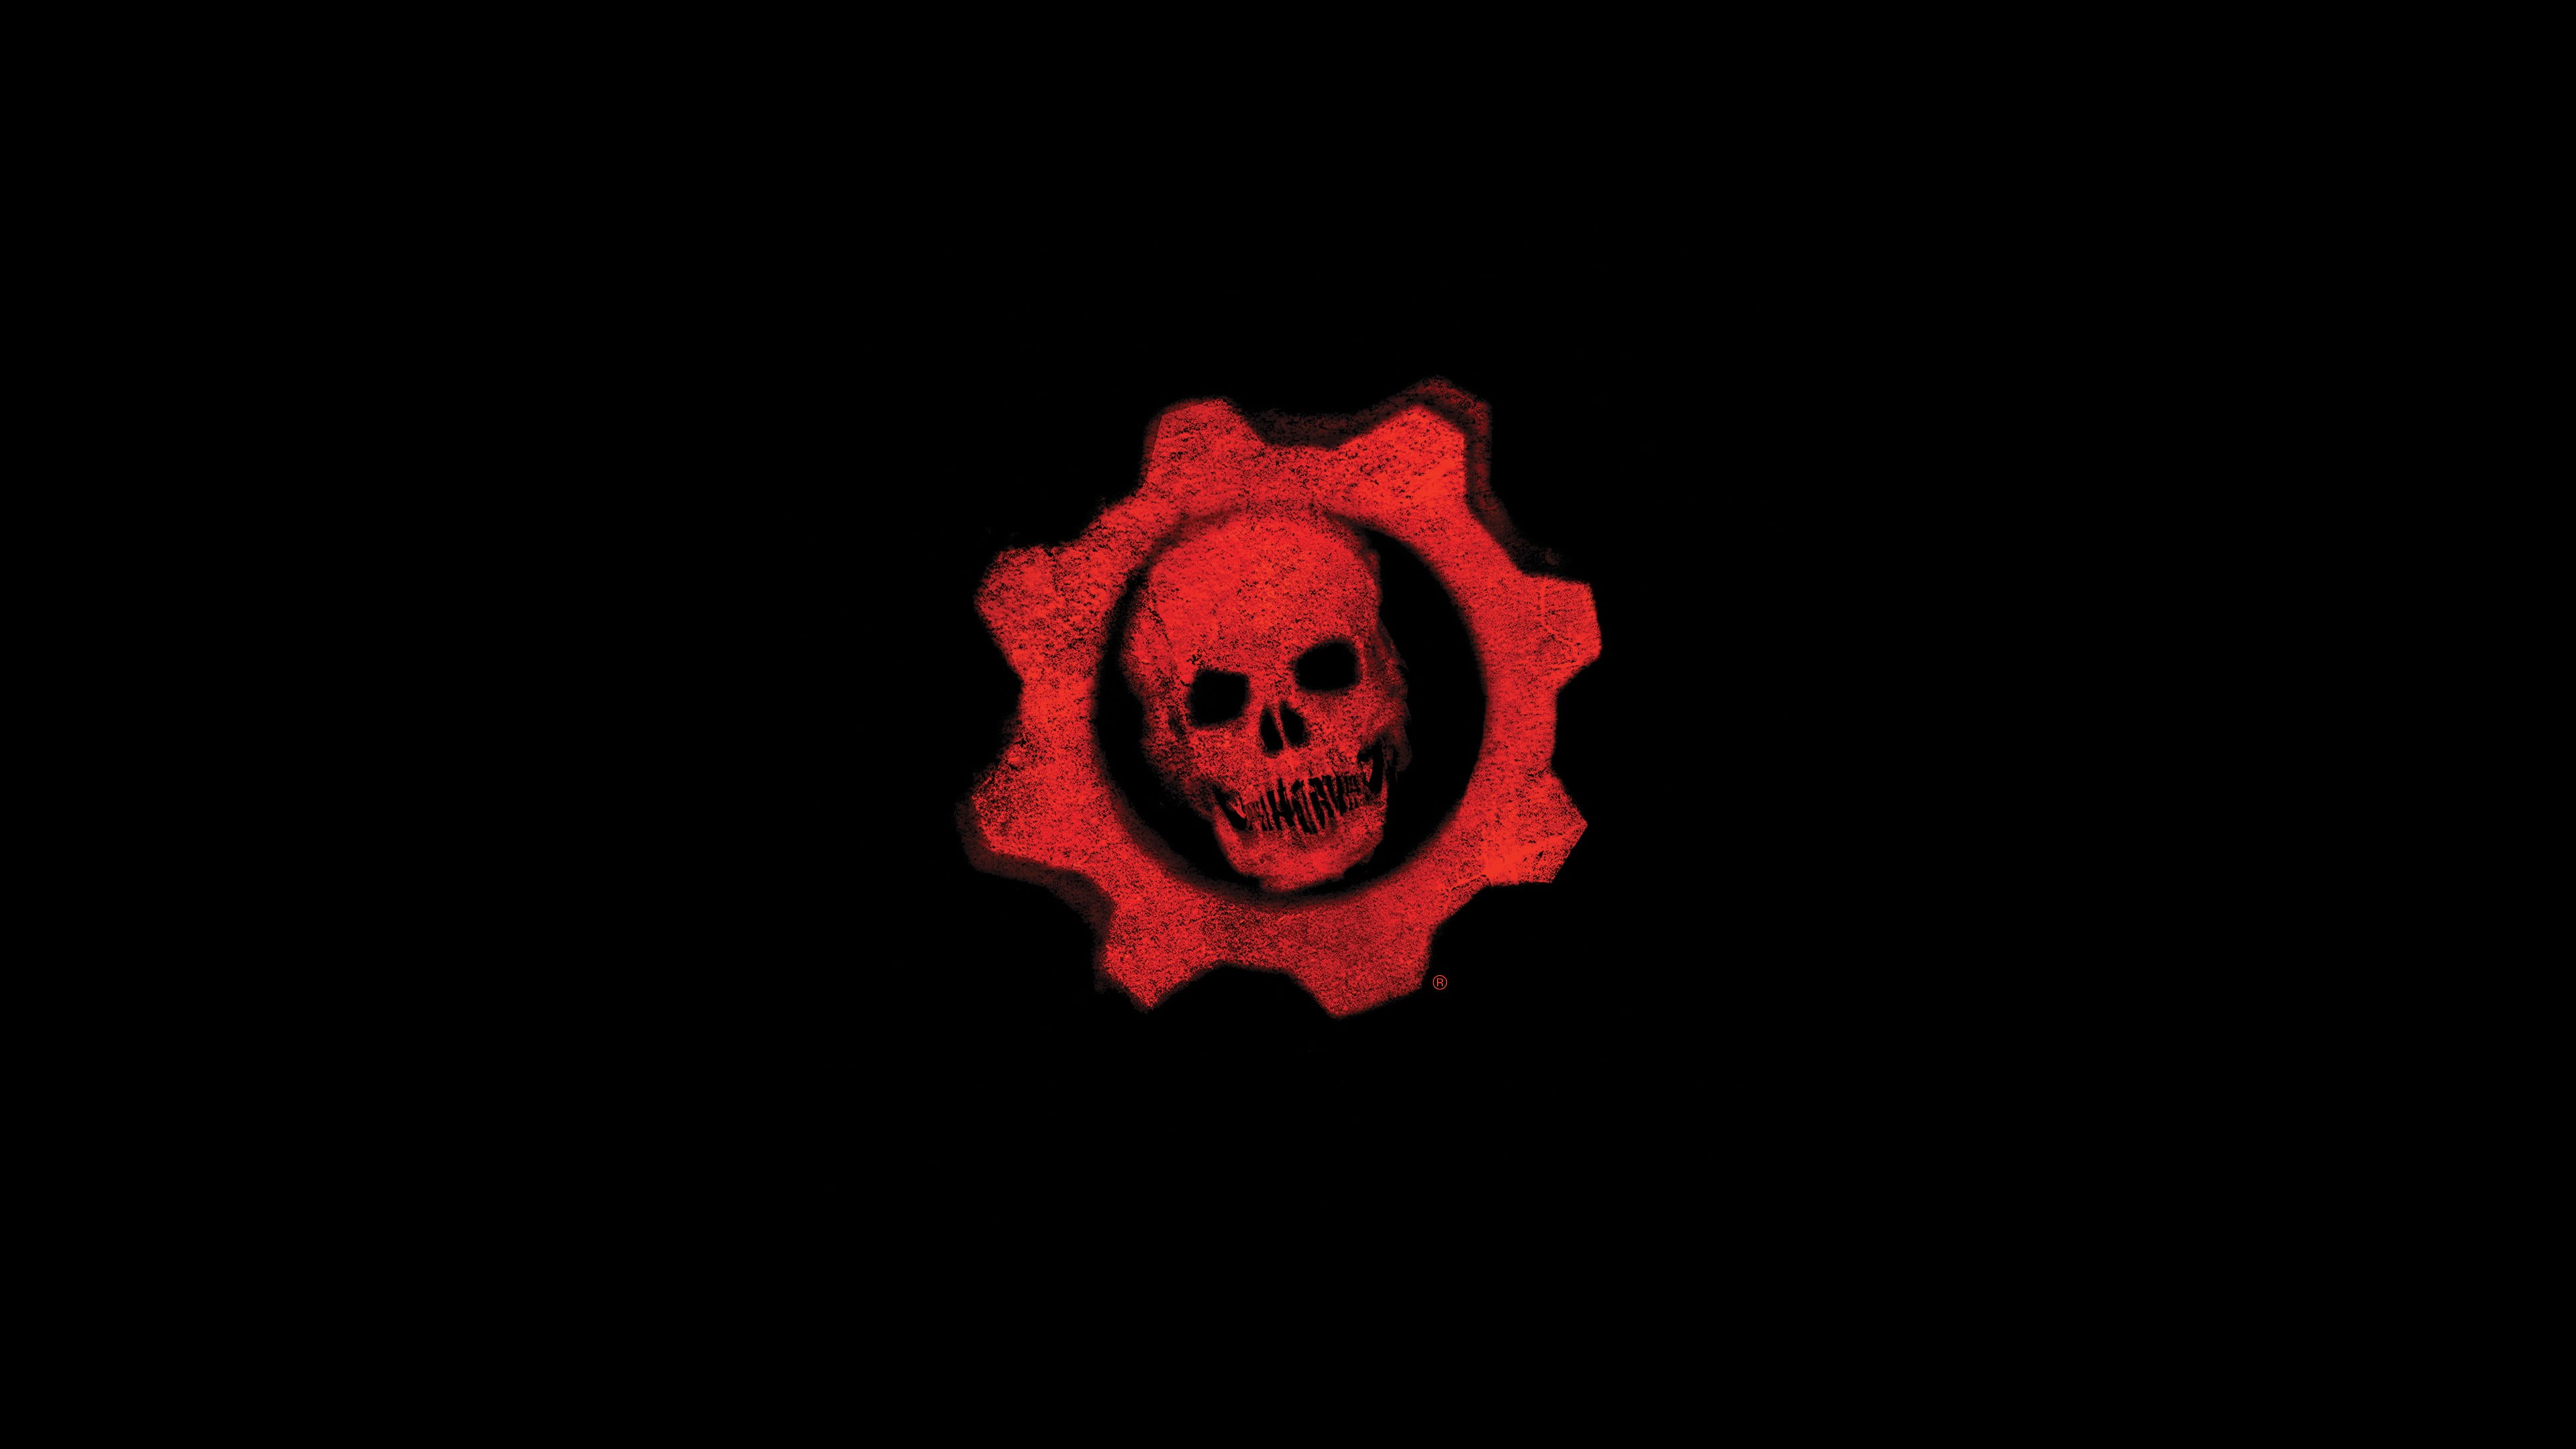 gears of war 4, xbox games, pc games, ps games, logo, 4k, black background